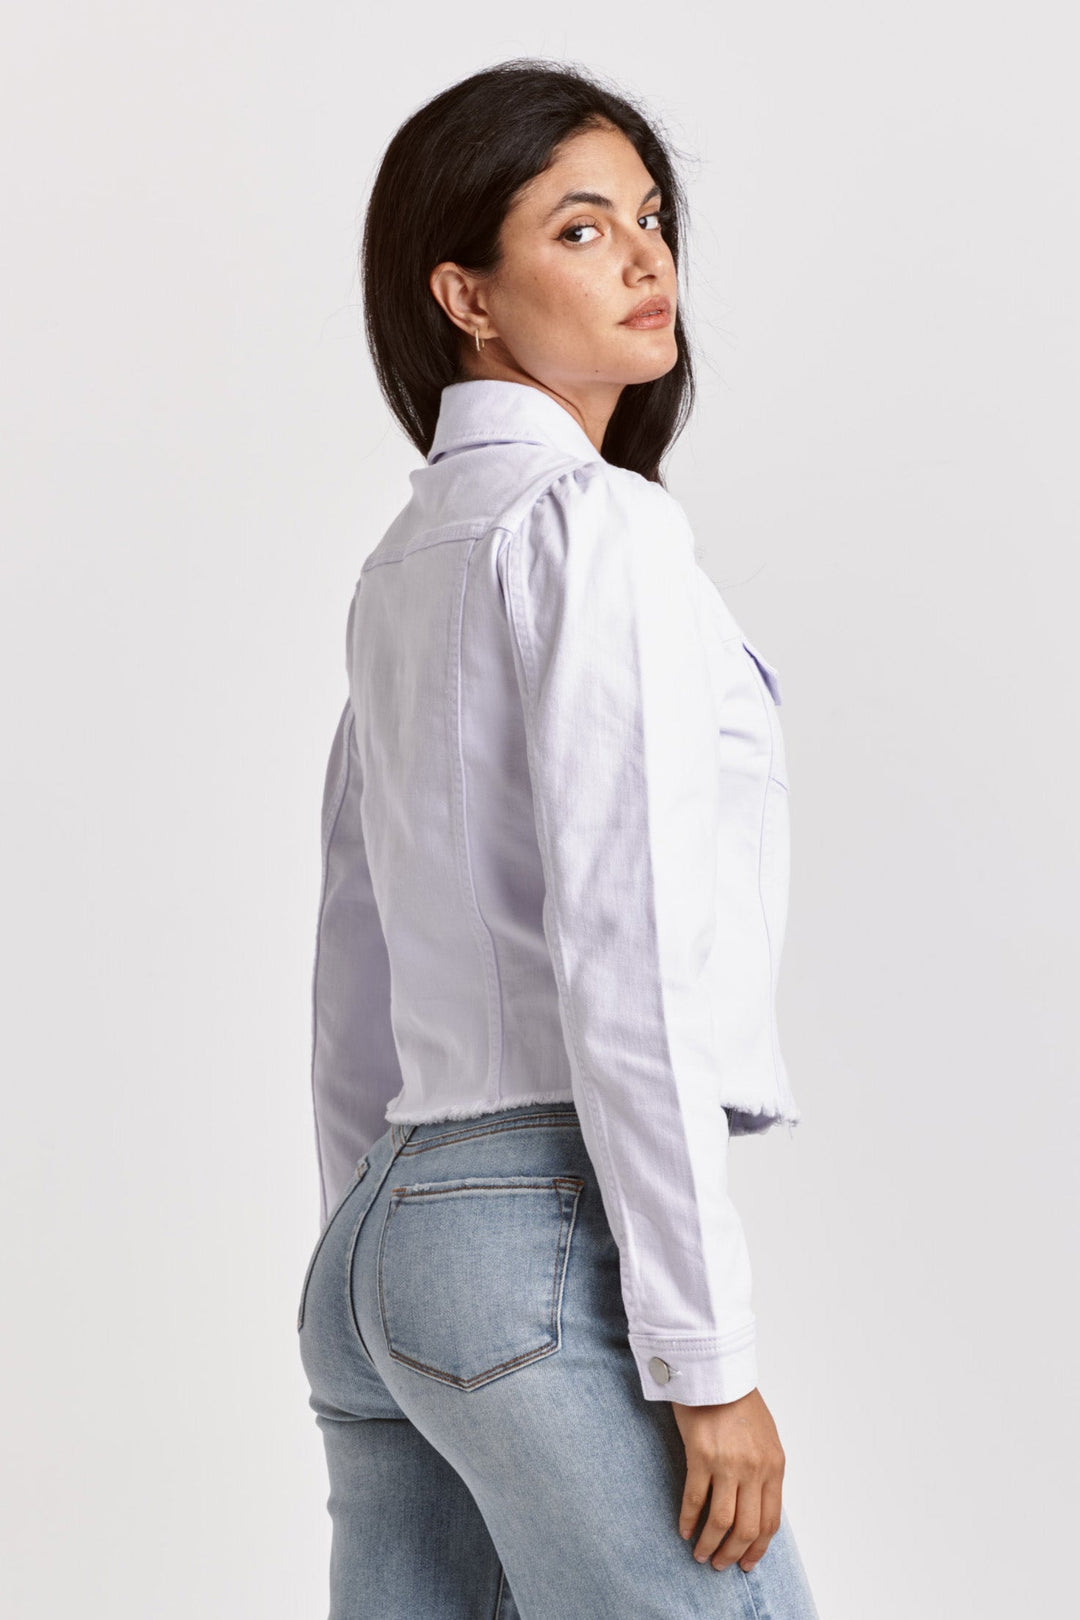 roselyn-cut-off-jacket-optic-white